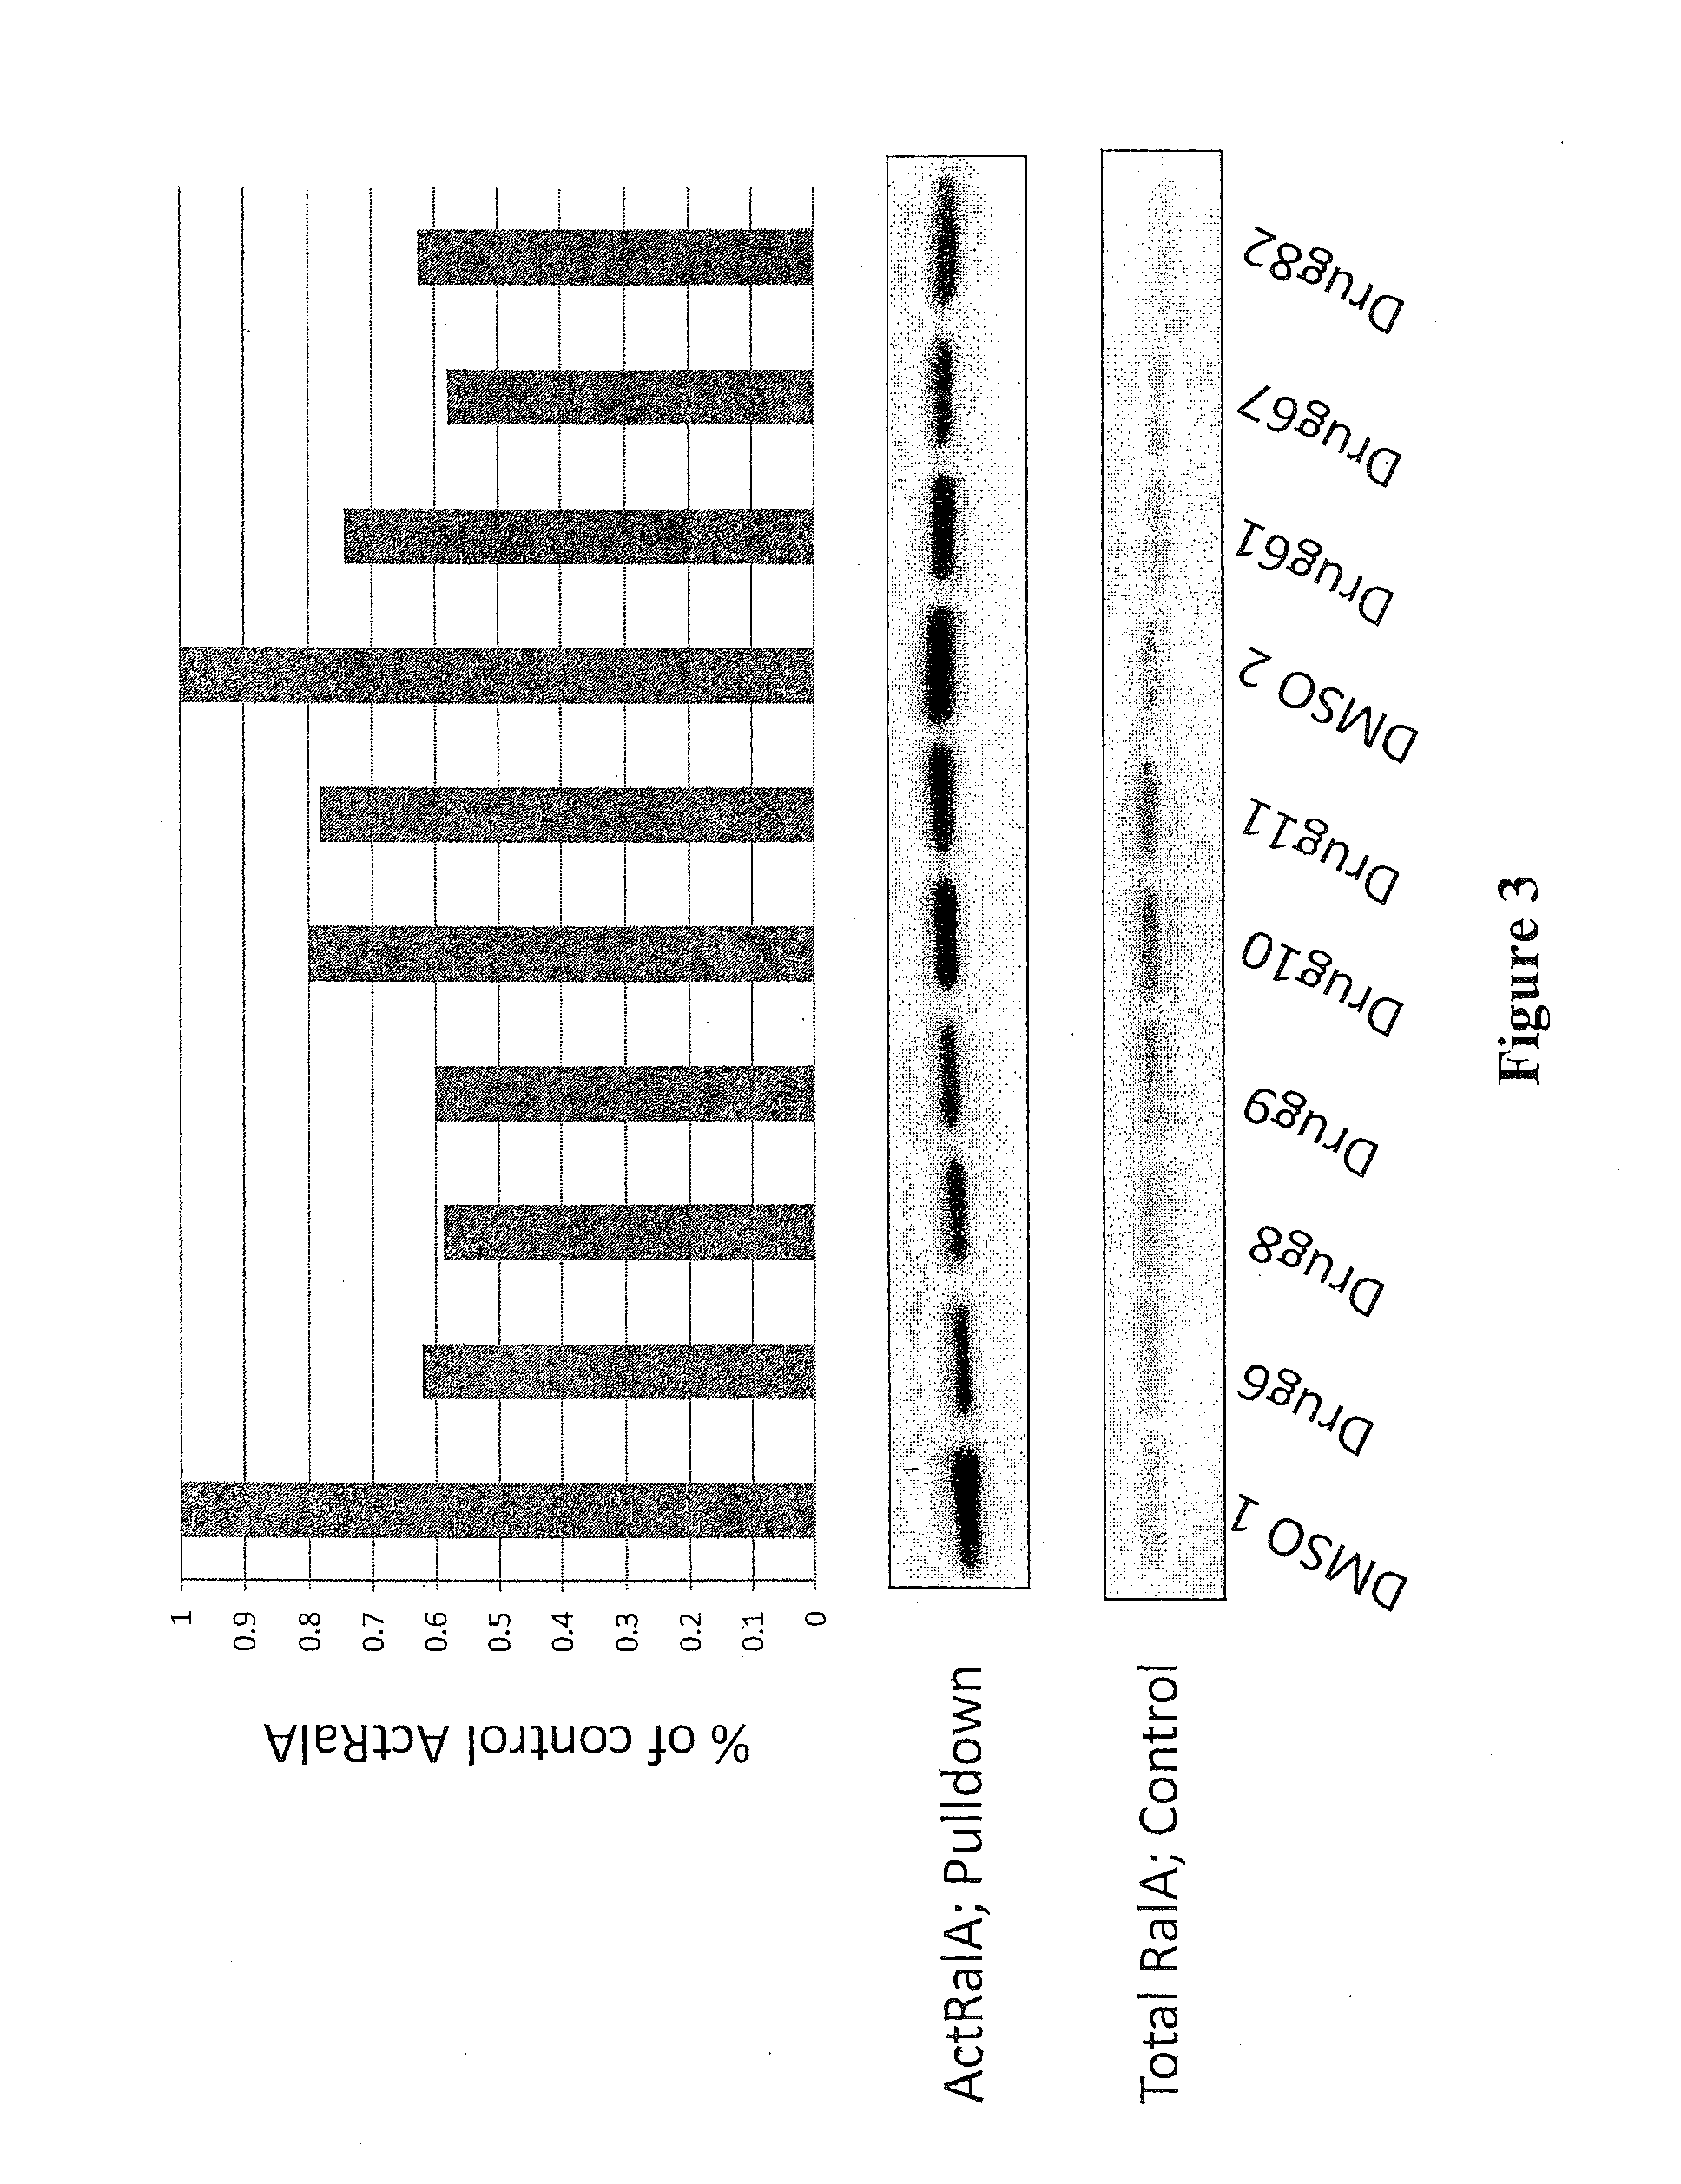 Anti-cancer compounds targeting Ral GTPases and methods of using the same